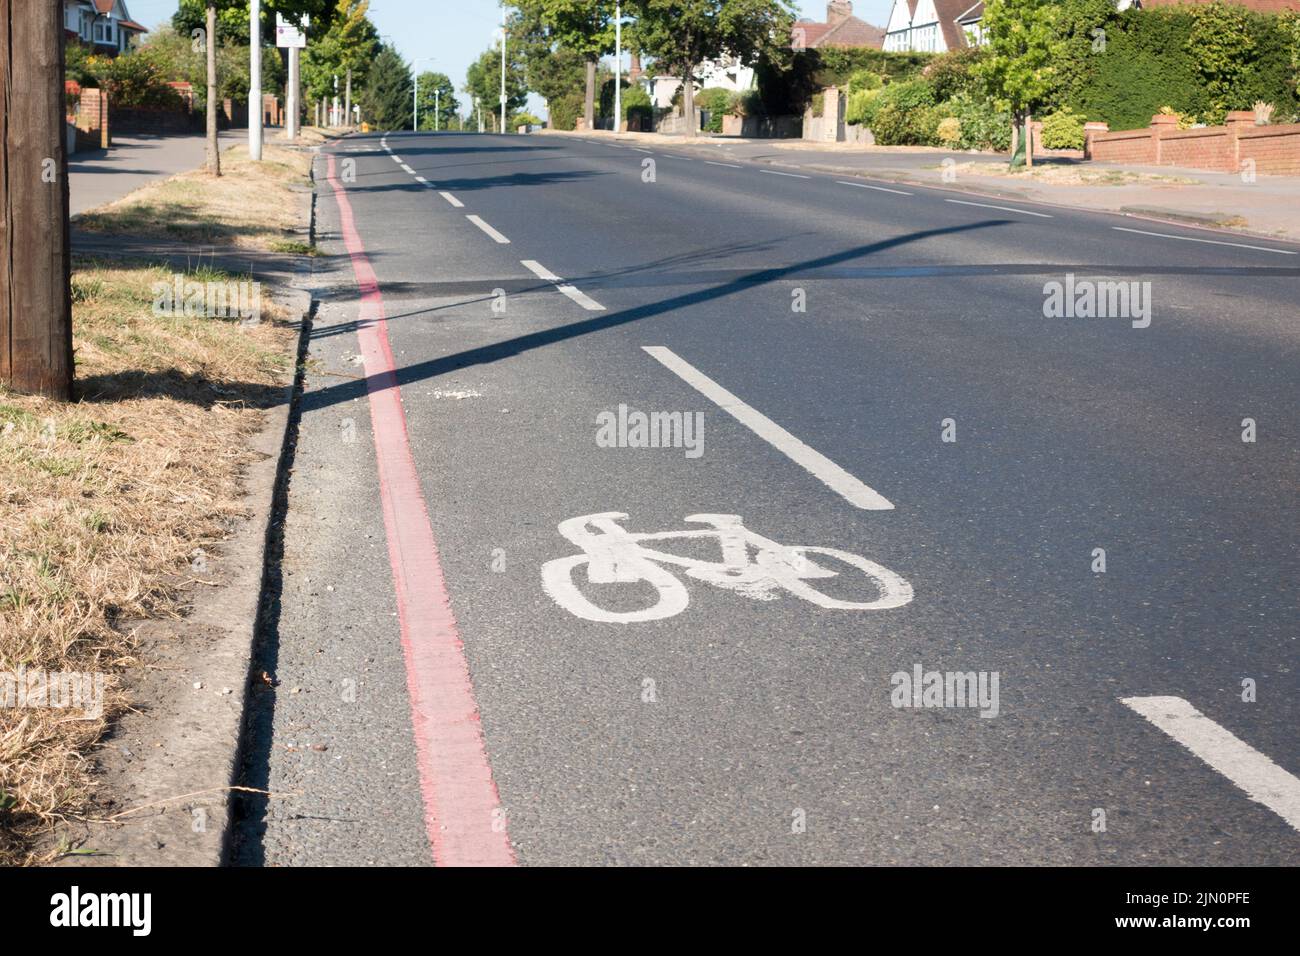 Bike lane on red route path Stock Photo